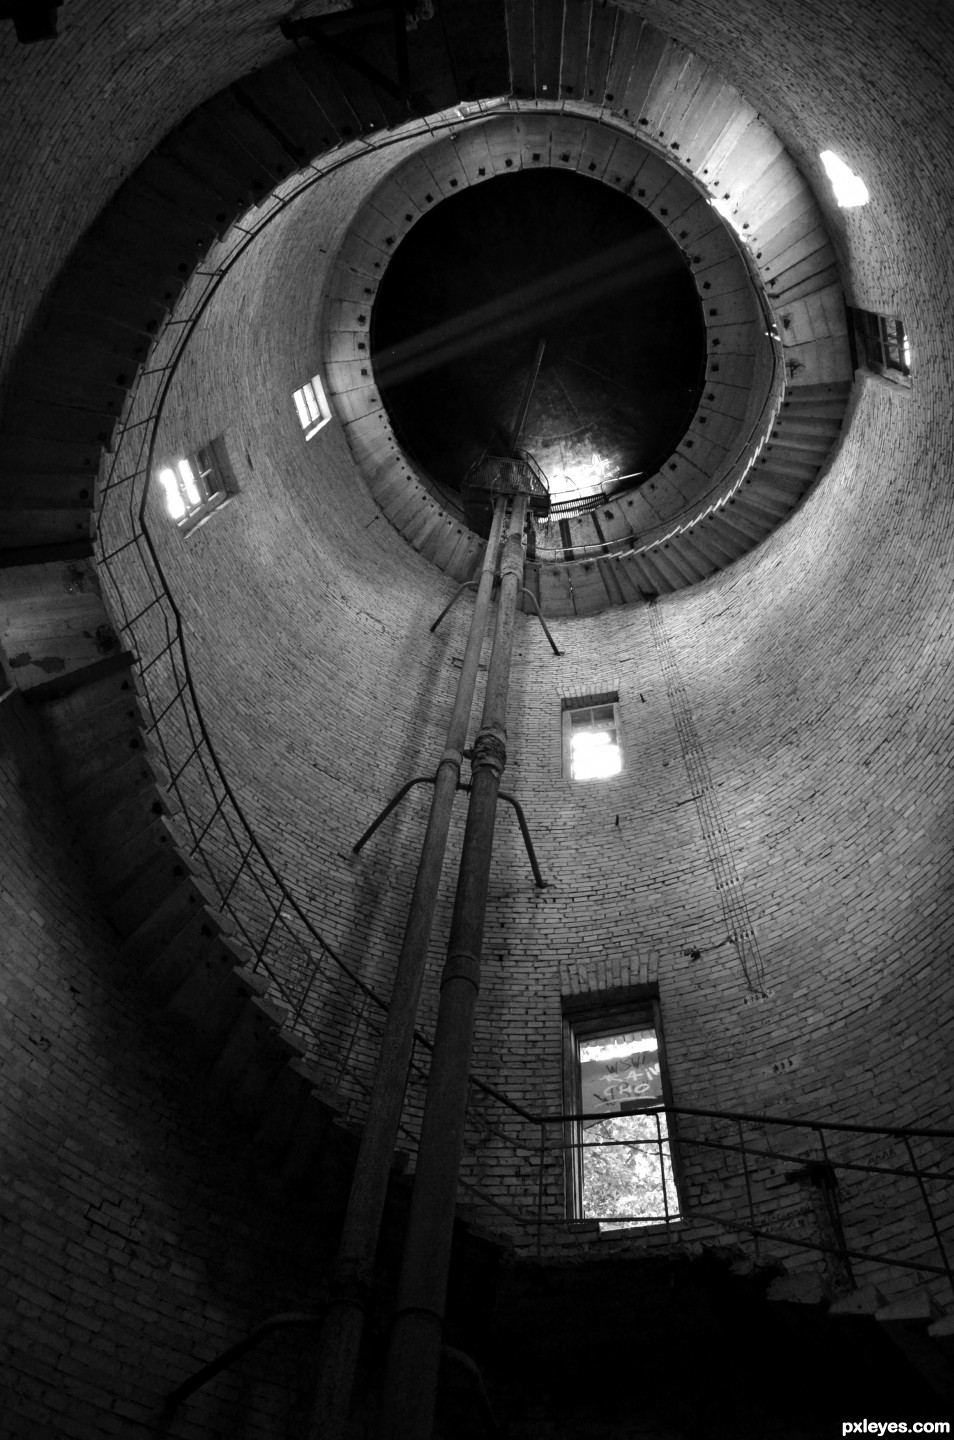 inside the water tower